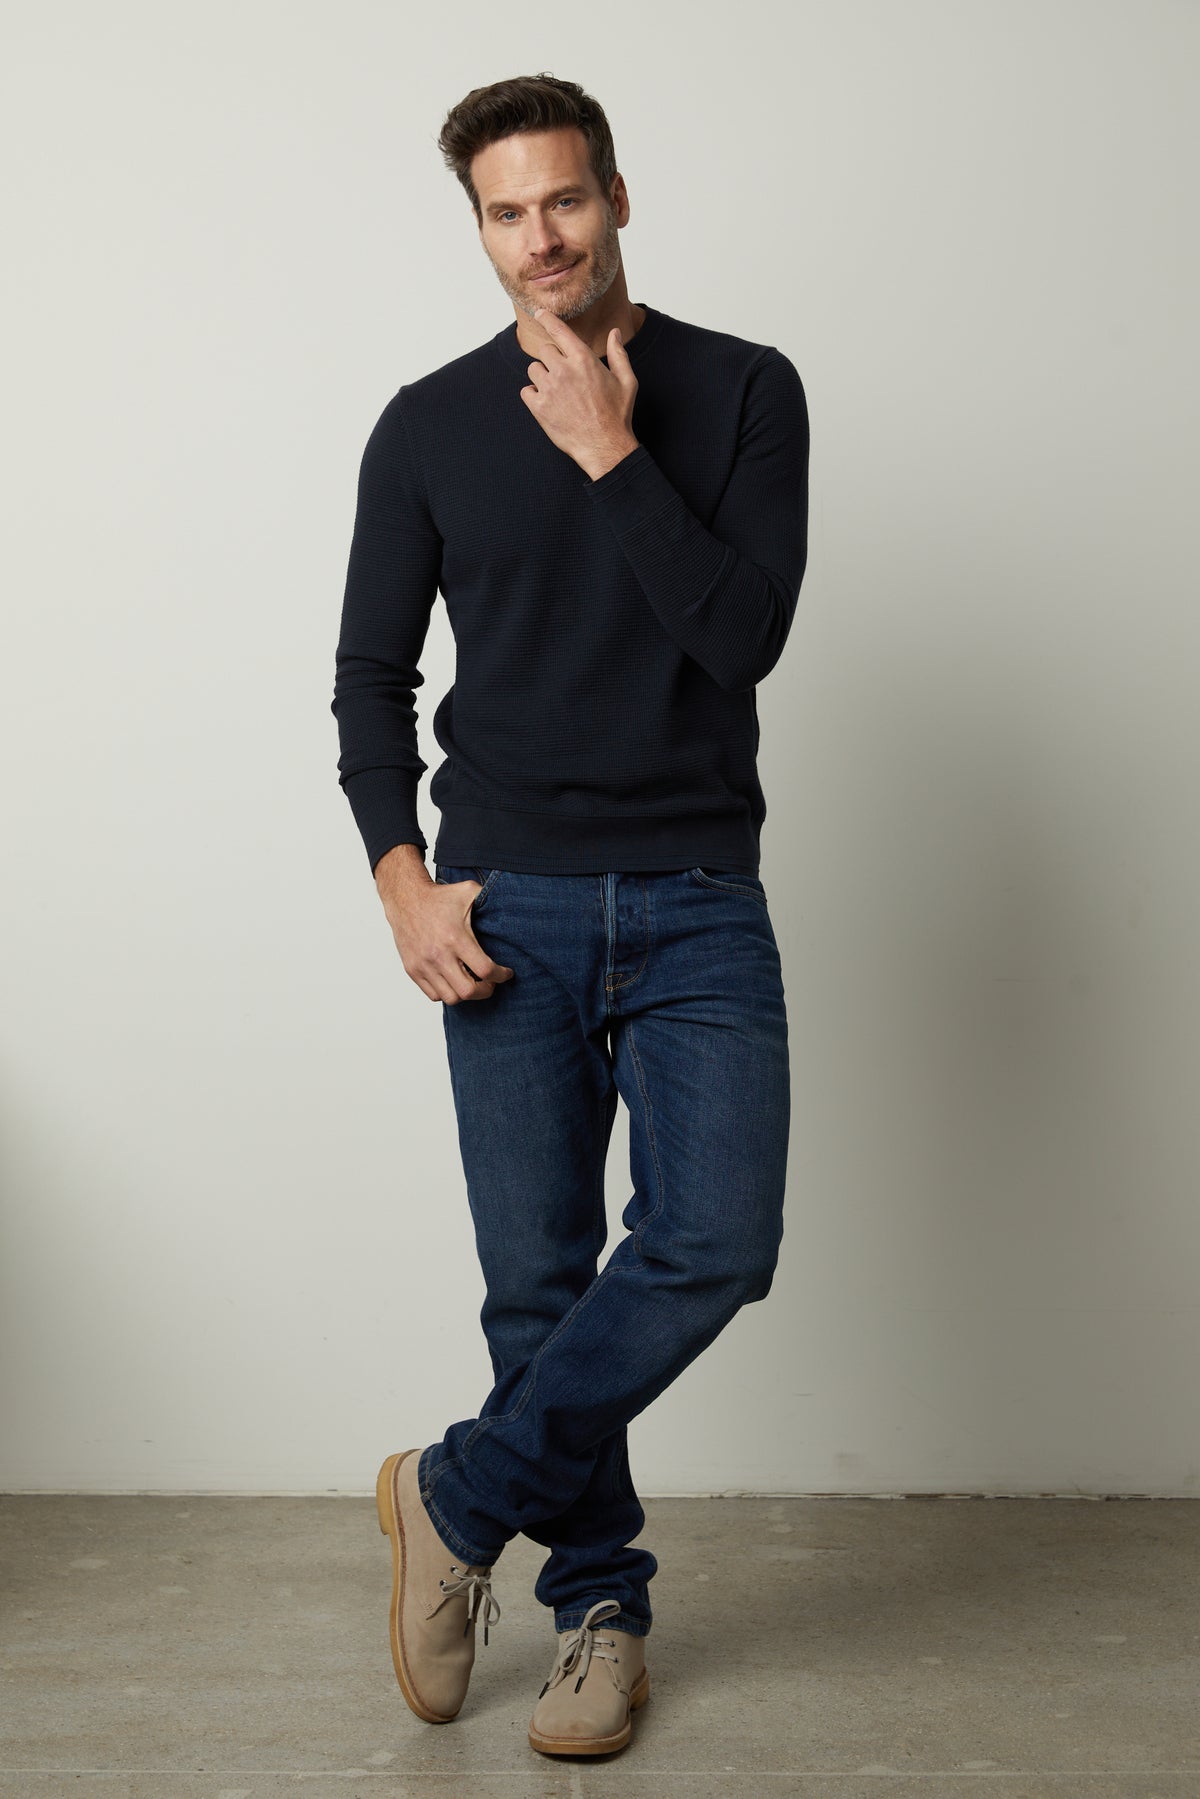 A man is posing in Velvet by Graham & Spencer jeans and a WALTER CREW NECK SWEATER.-26846174576833